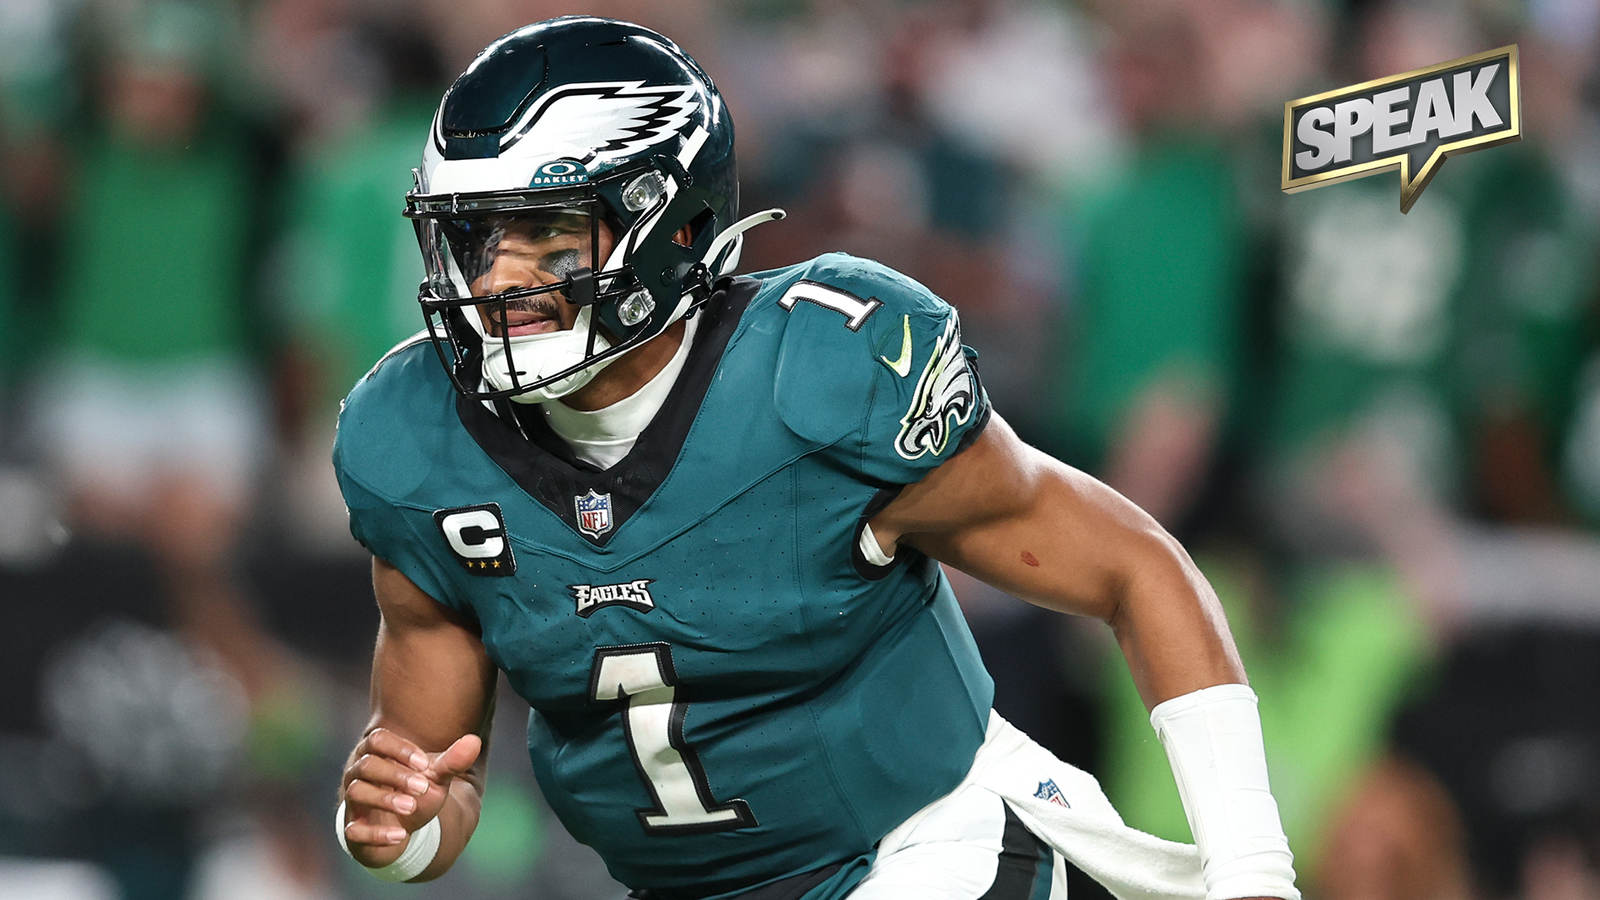 Do Eagles look like Super Bowl contenders?